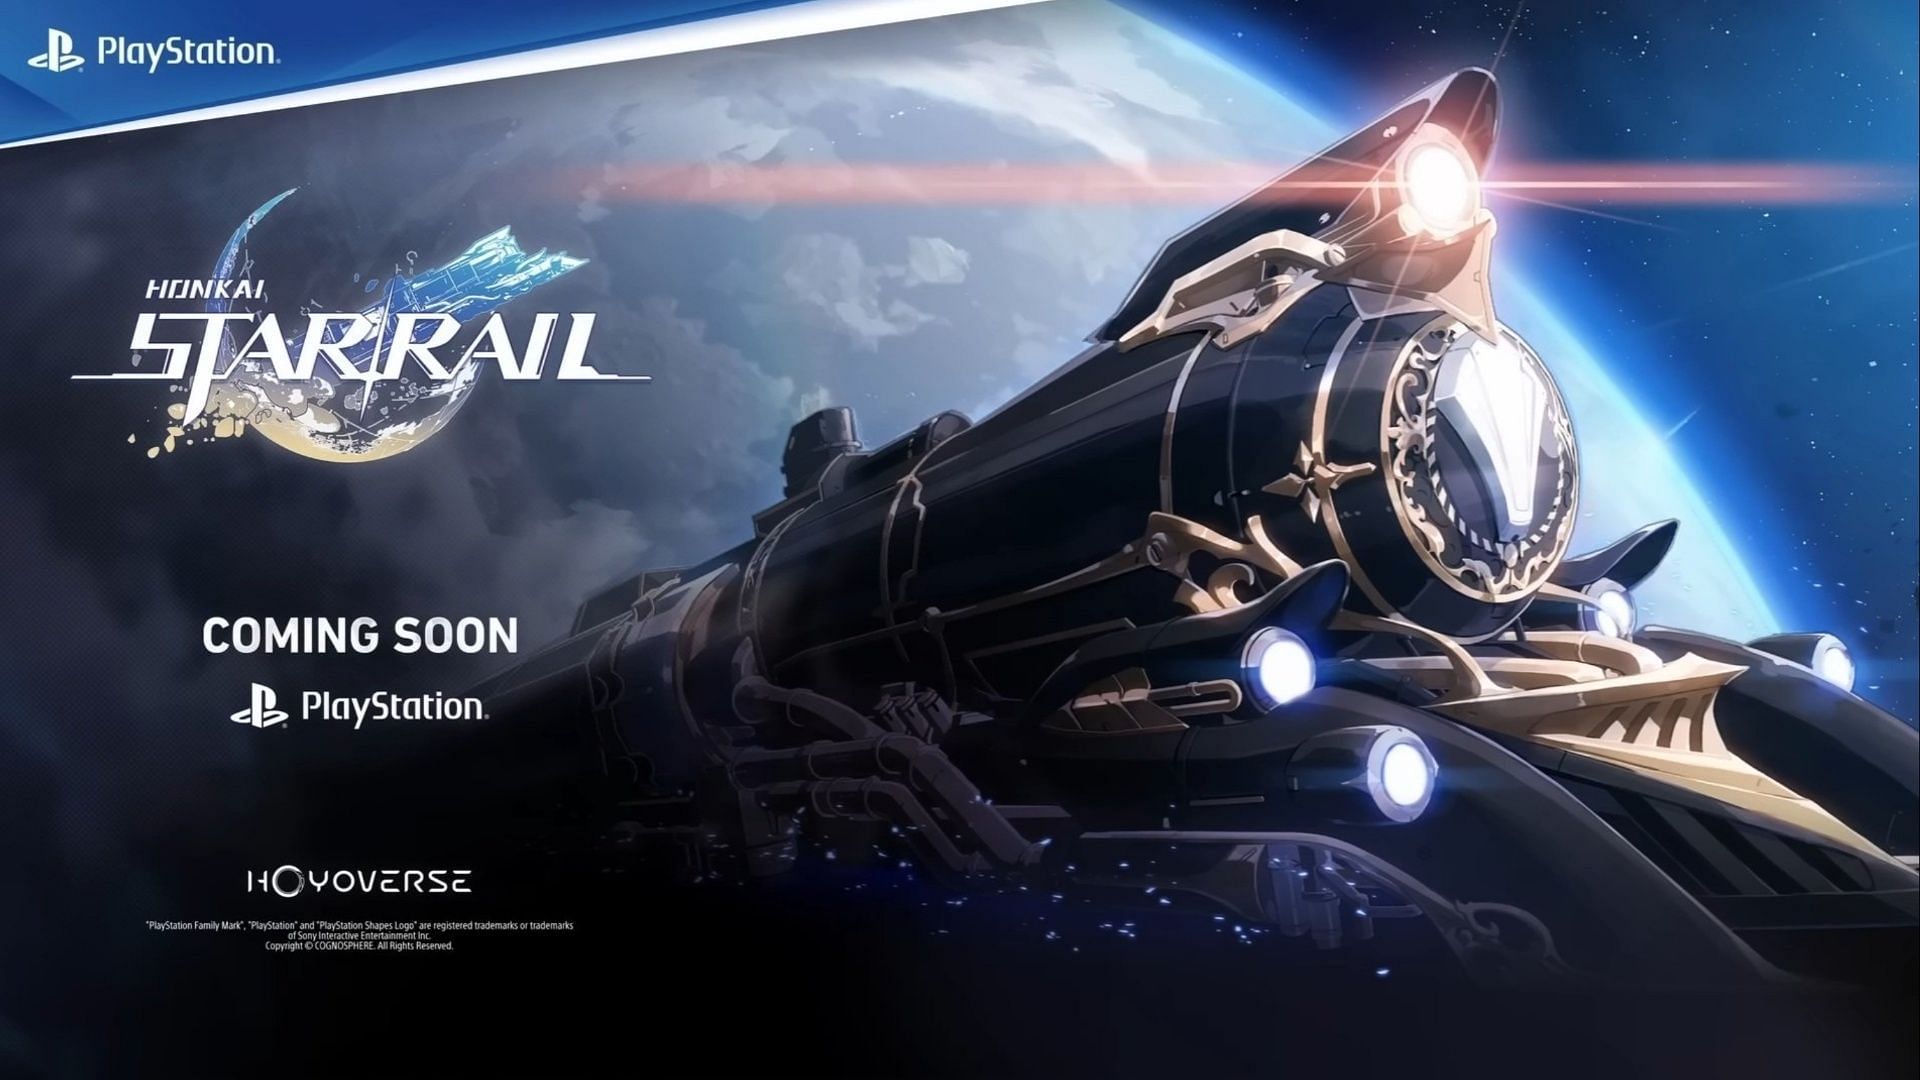 Honkai Star Rail could become even more successful with its release on PlayStation (Image via PlayStation)